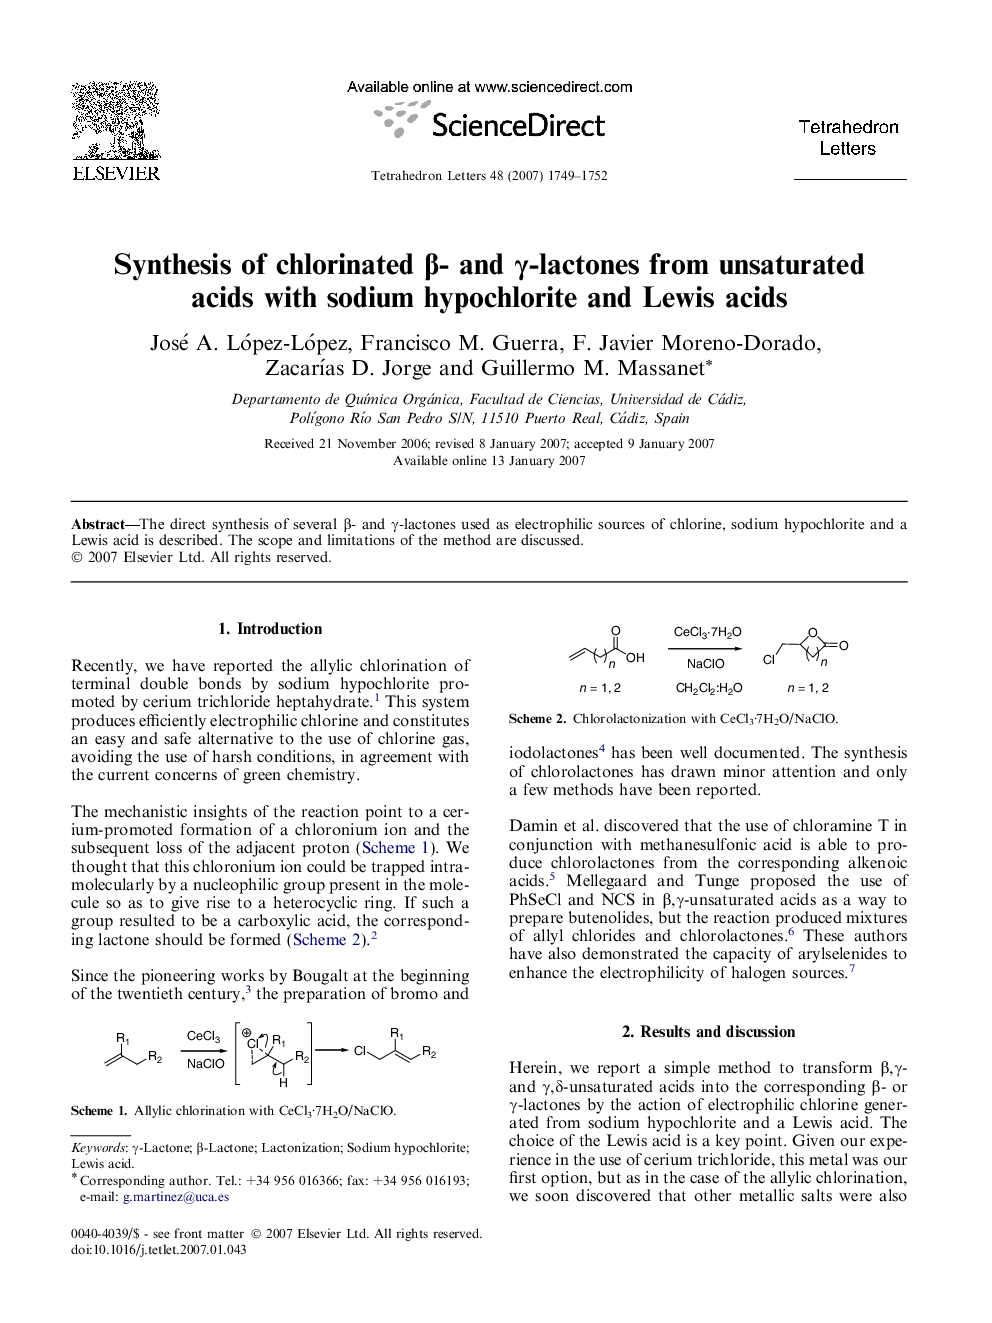 Synthesis of chlorinated Î²- and Î³-lactones from unsaturated acids with sodium hypochlorite and Lewis acids